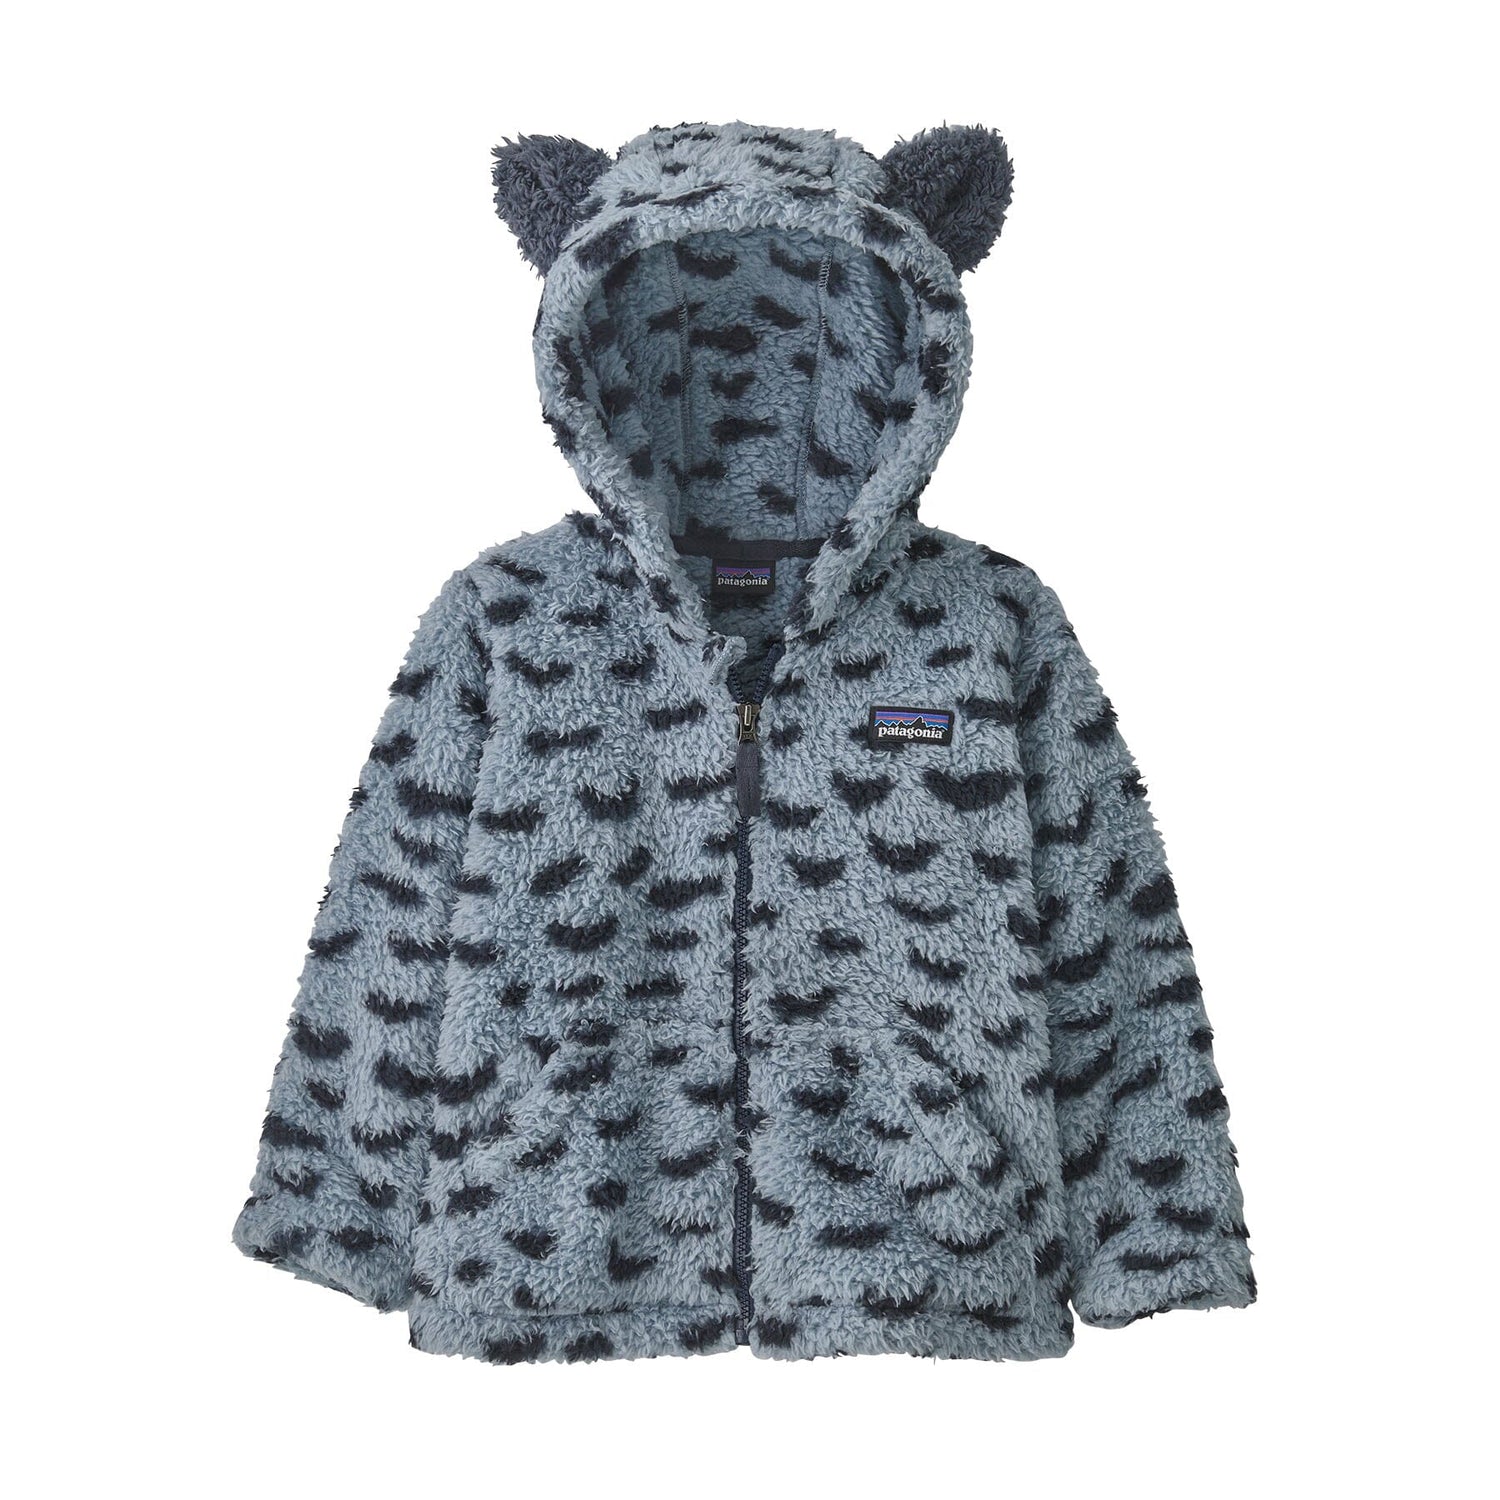 Patagonia Kids Furry Friends Hoody - 100% Recycled Polyester Fleece Snowy: Light Plume Grey Shirt